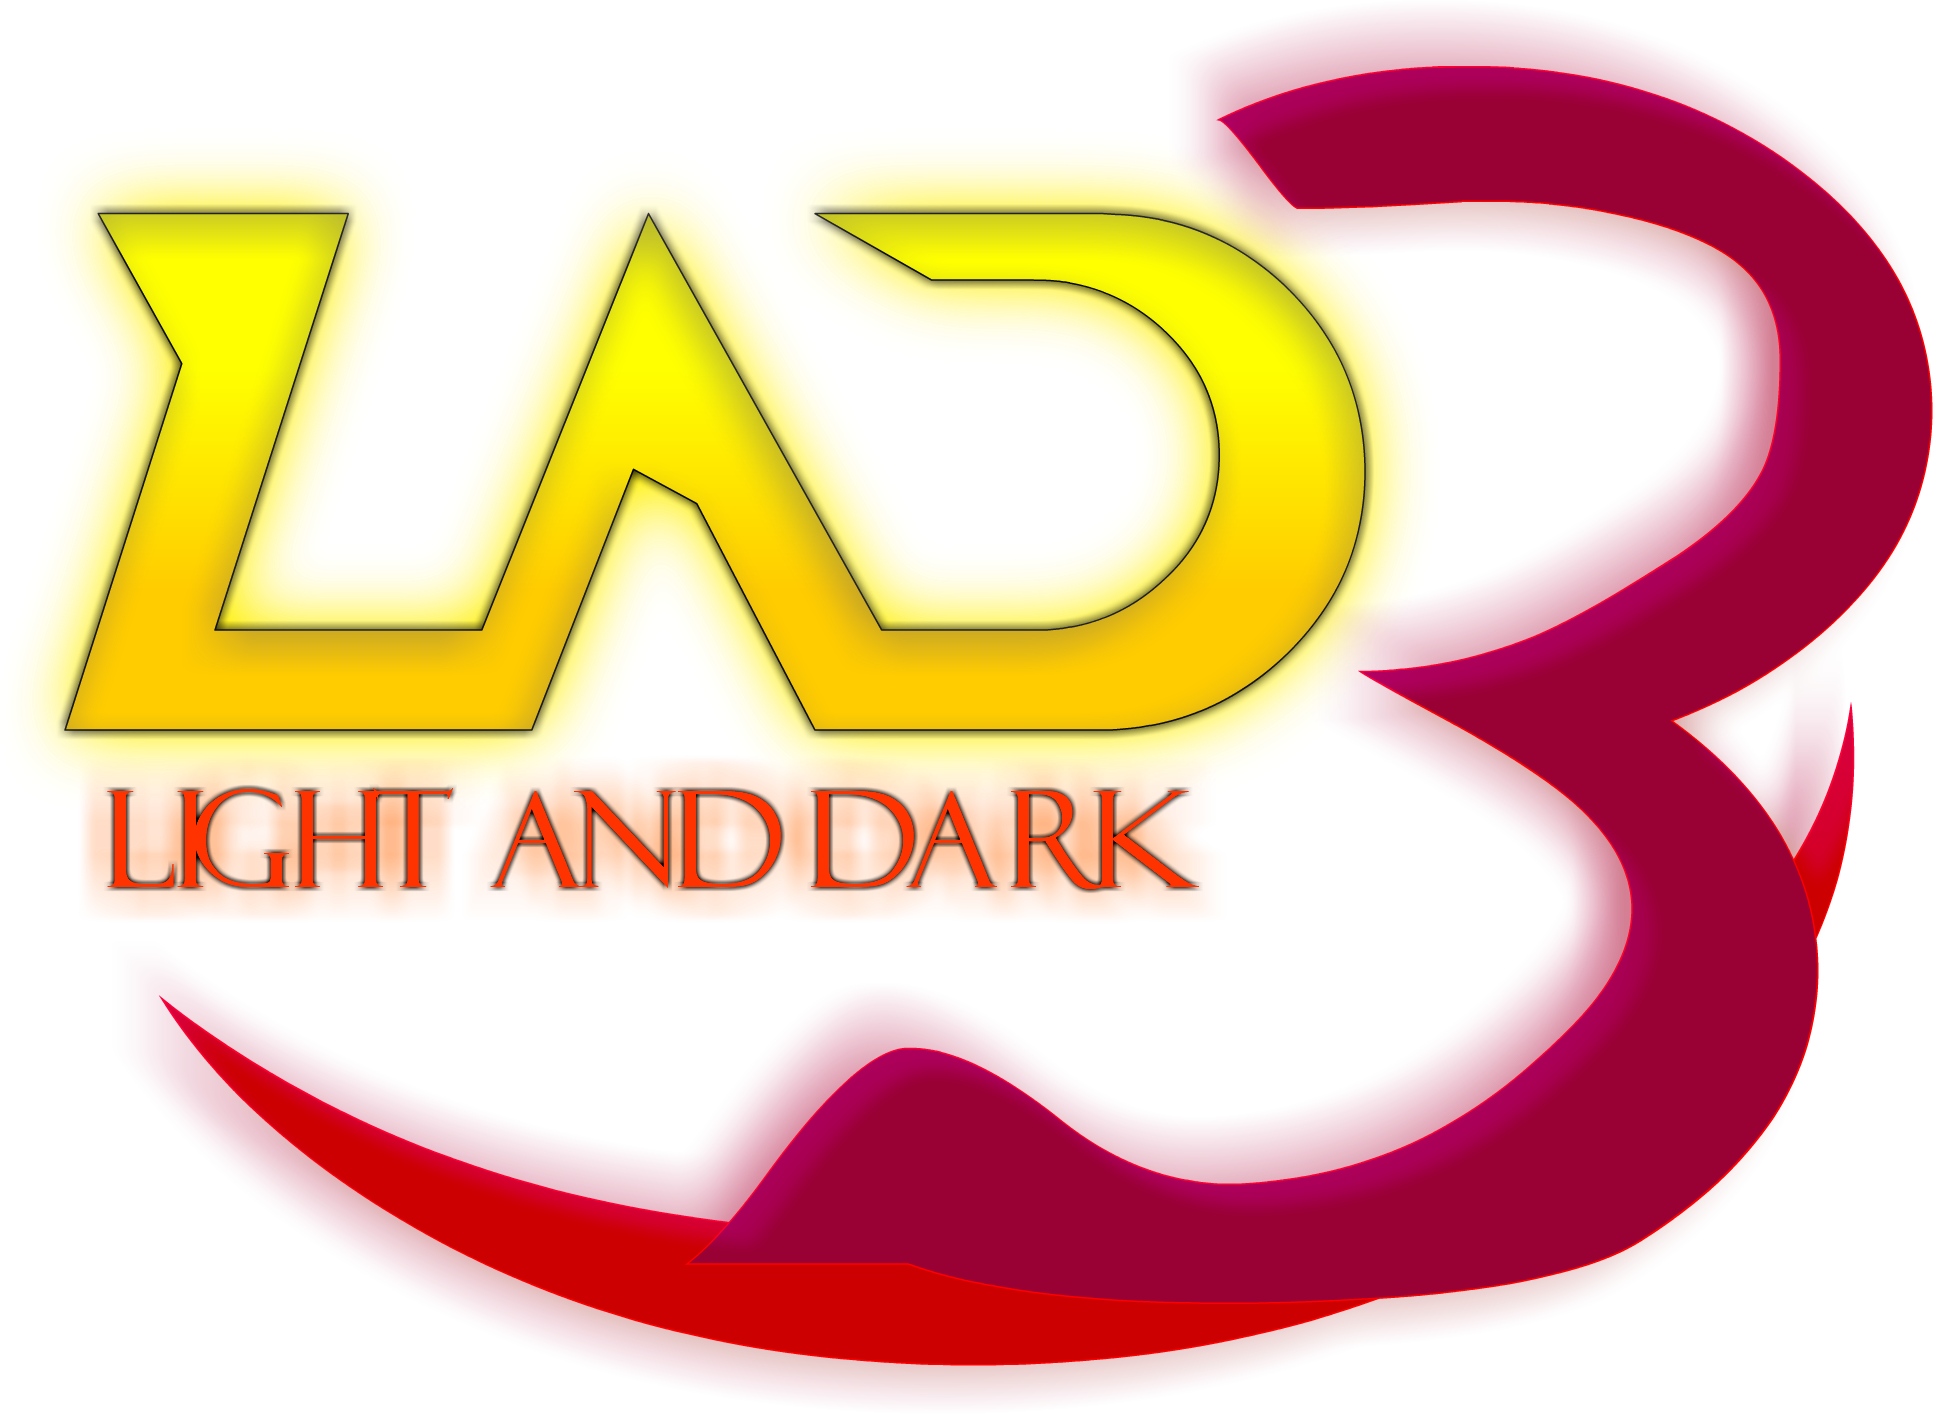 LAD_LOGO_EP3.png